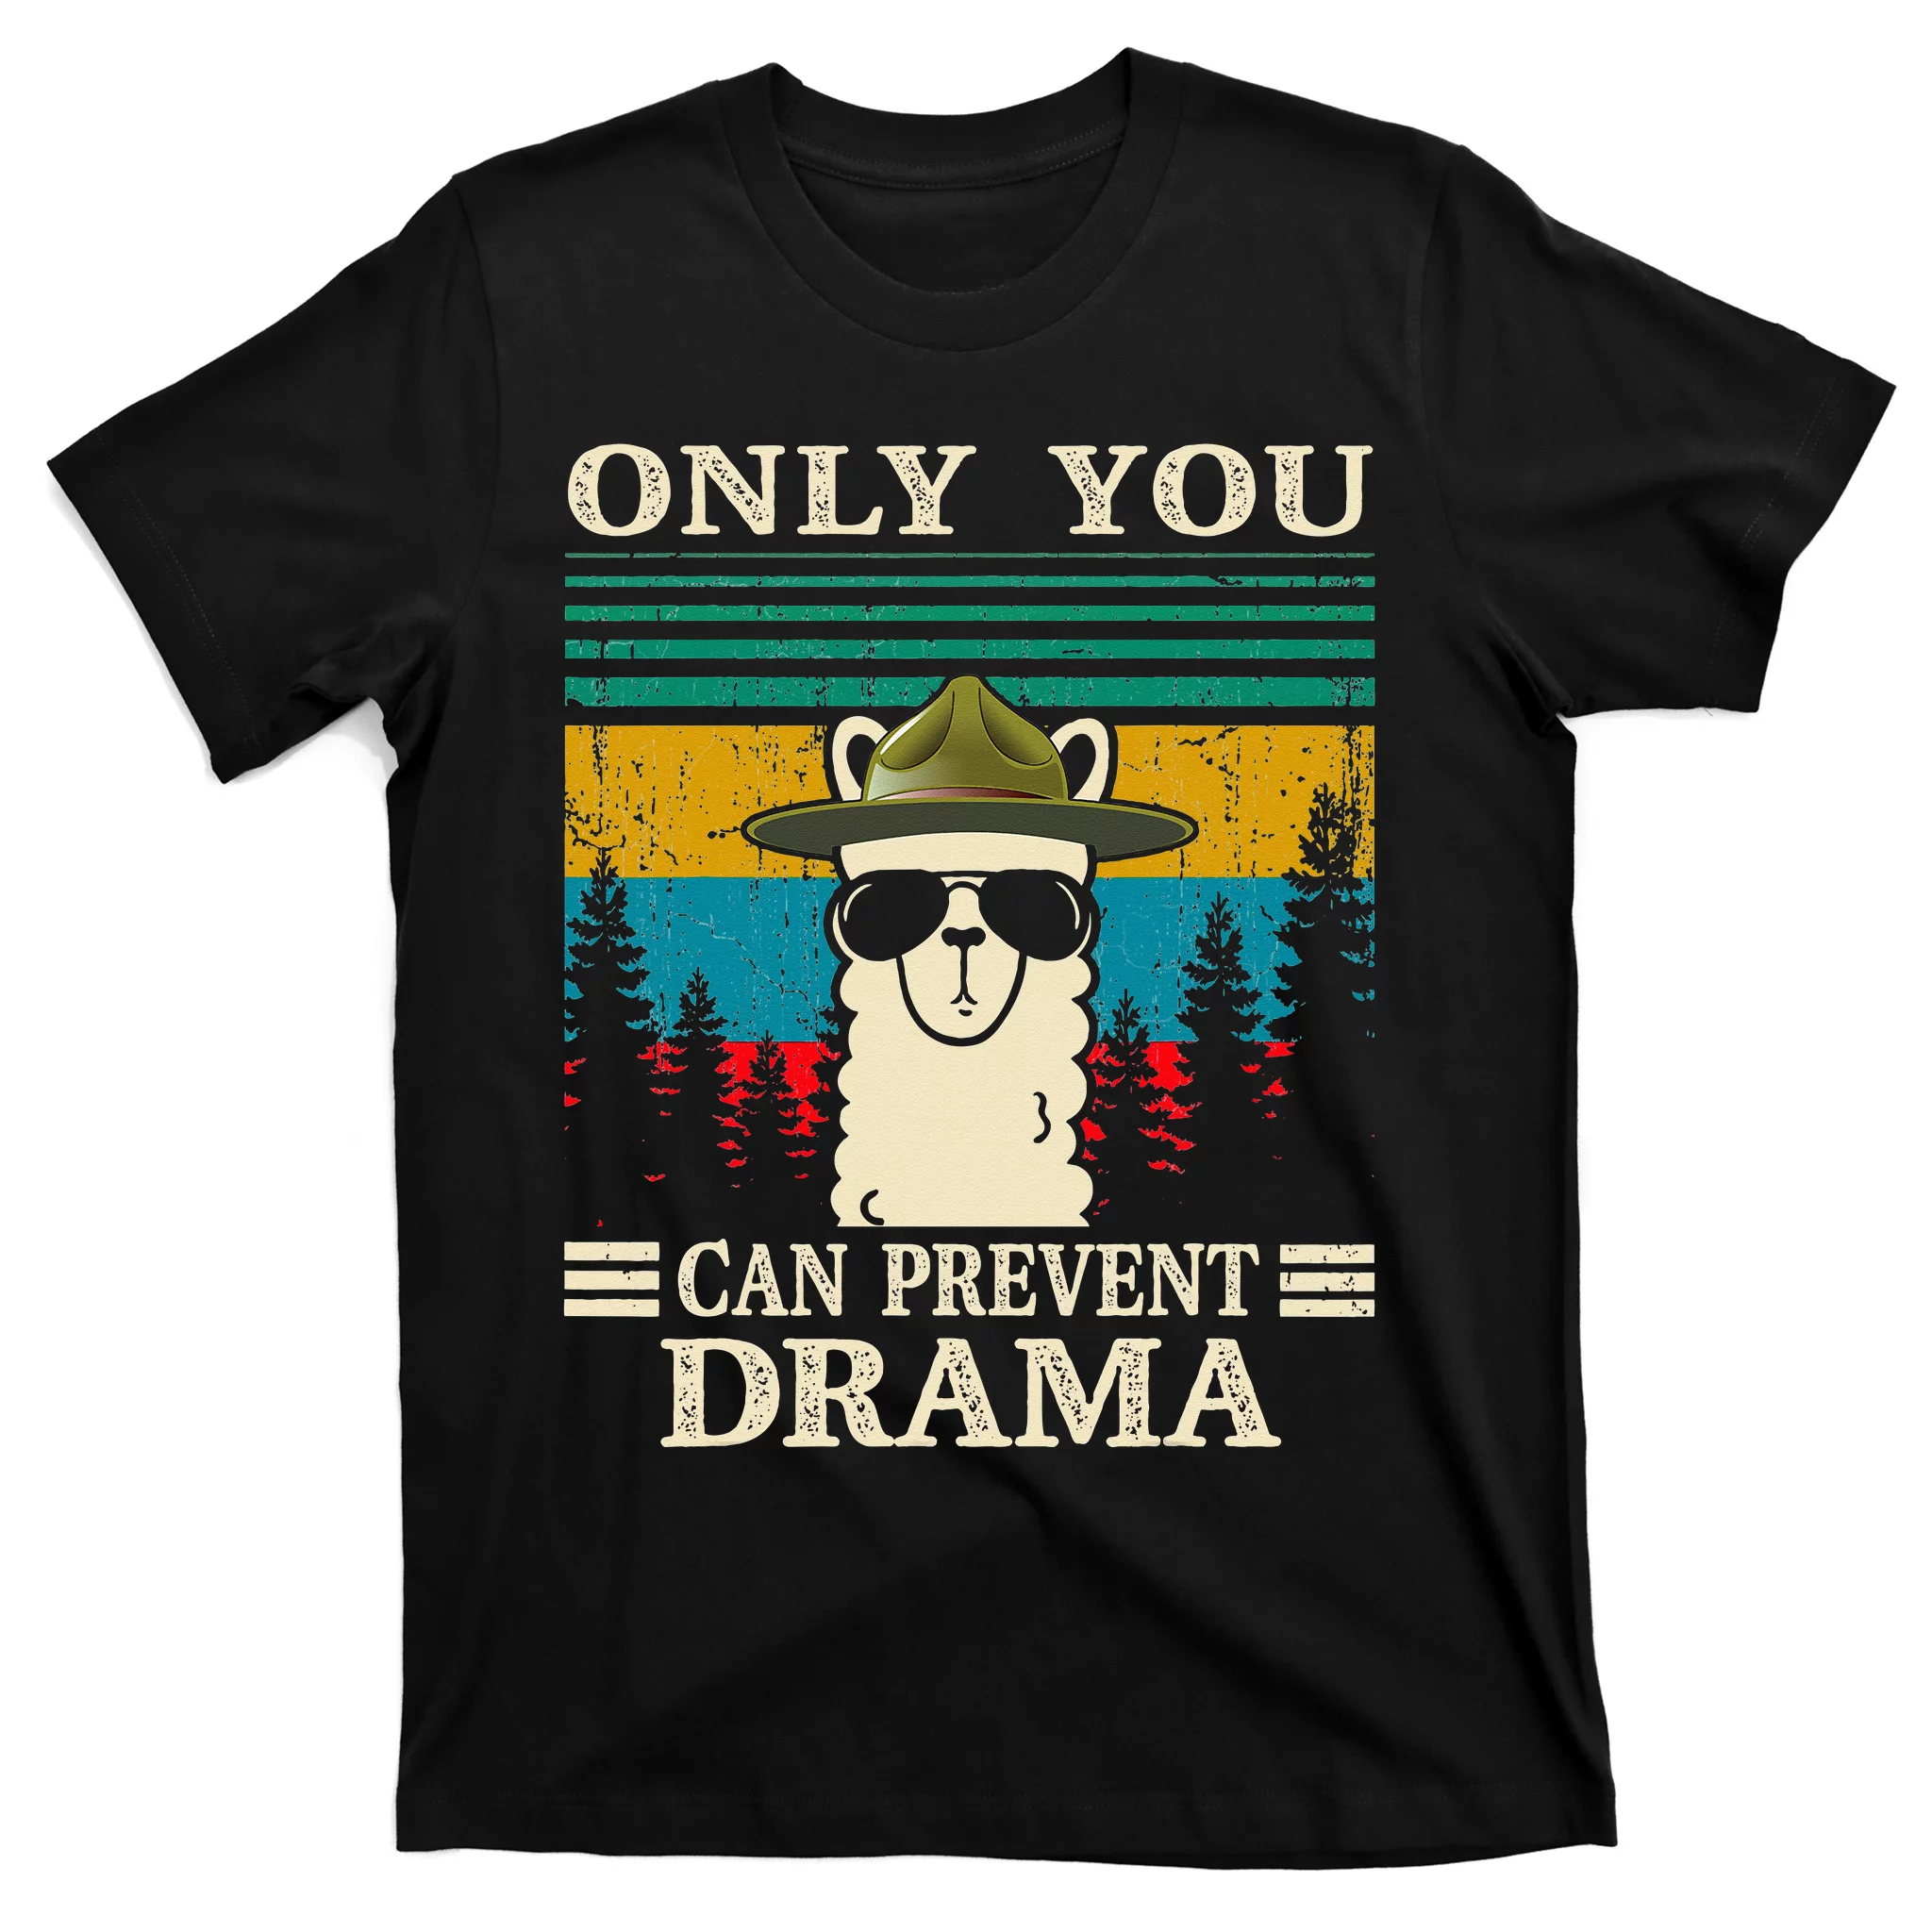 Llama　TeeShirtPalace　You　T-Shirt　Can　Camping　Drama　Gifts　Only　Prevent